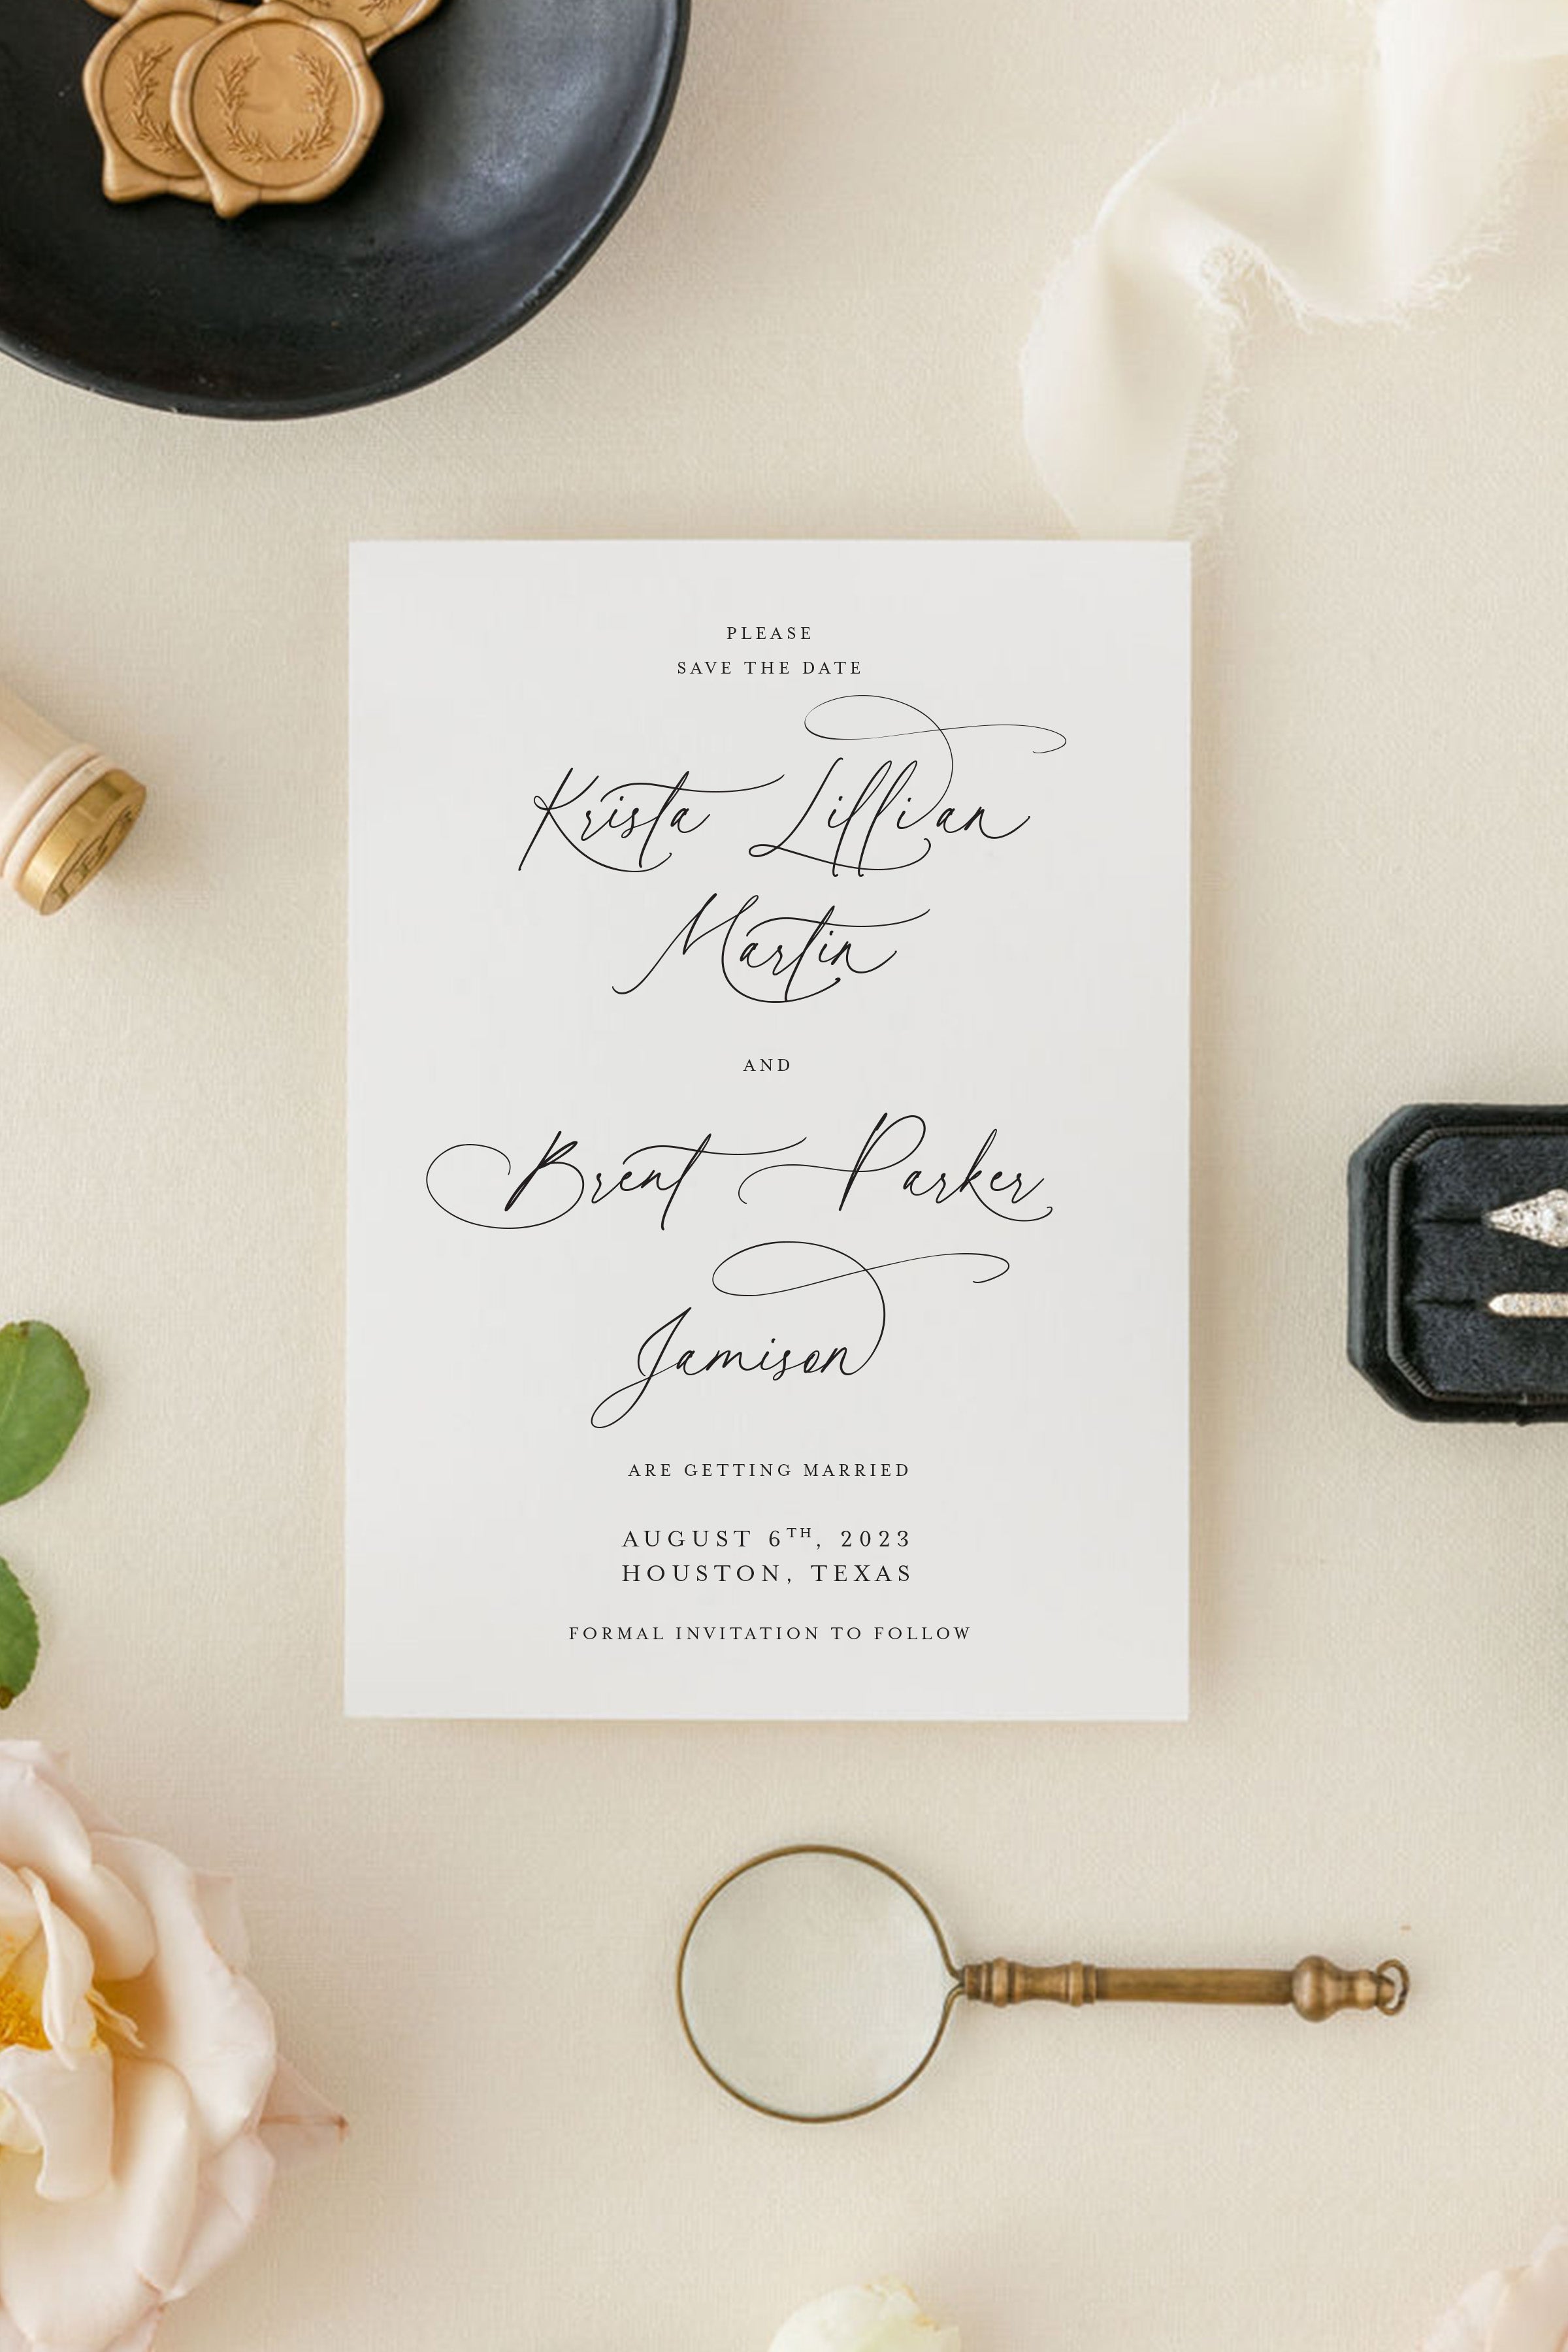 Elegant Save The Date Card | The Krista